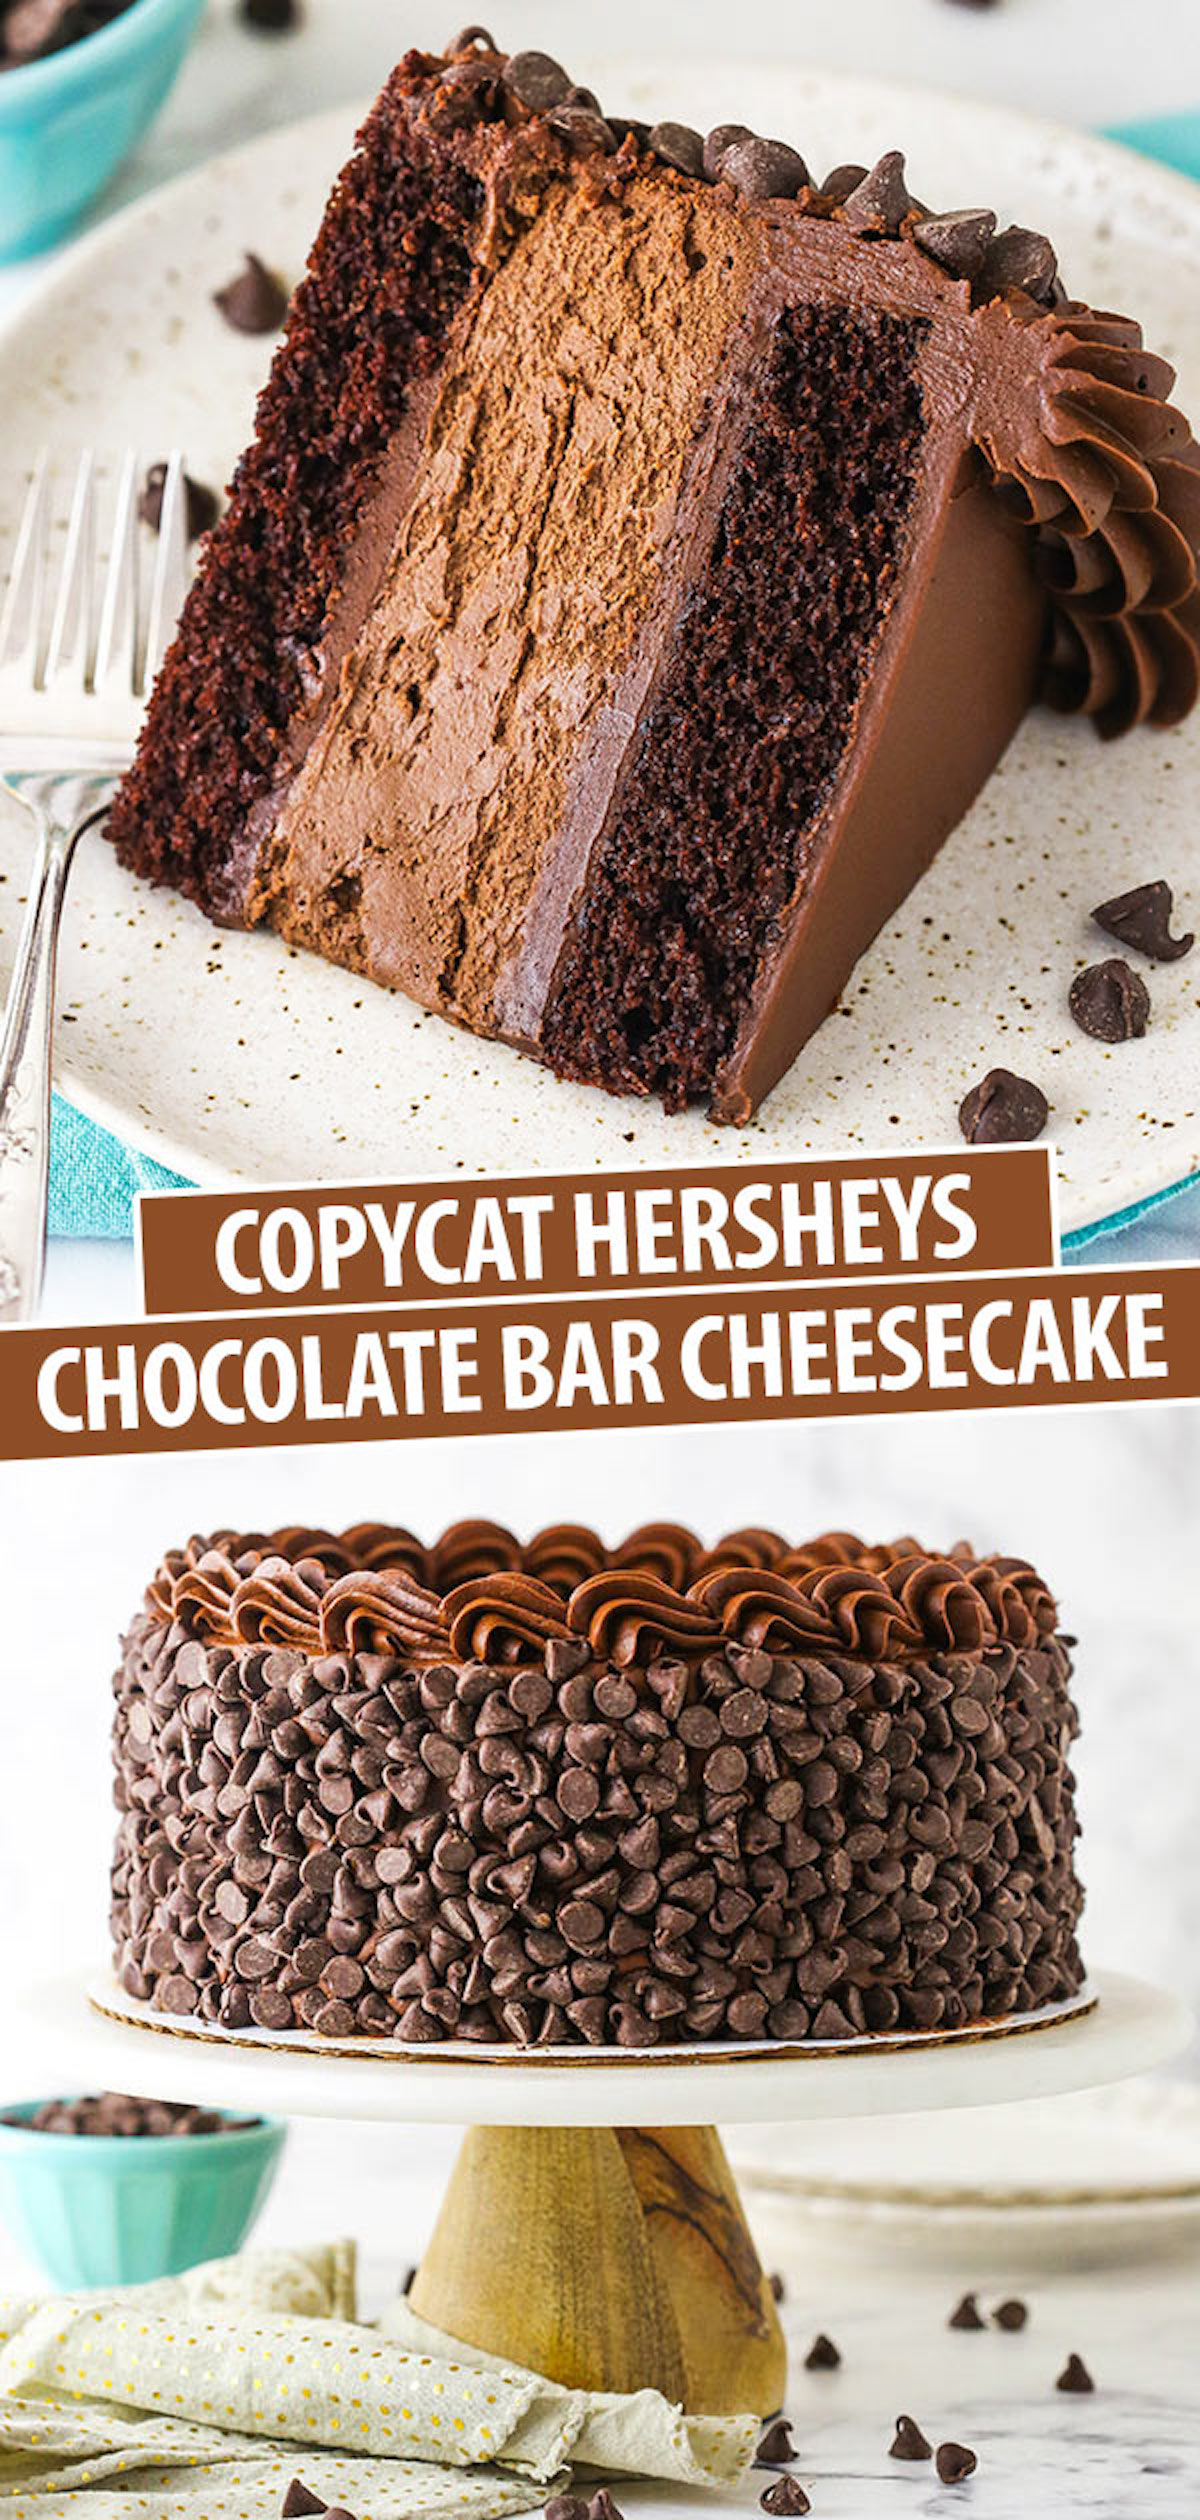 A Collage of Two Images of Hershey's Cheesecake - a Slice vs. the Cake as a Whole